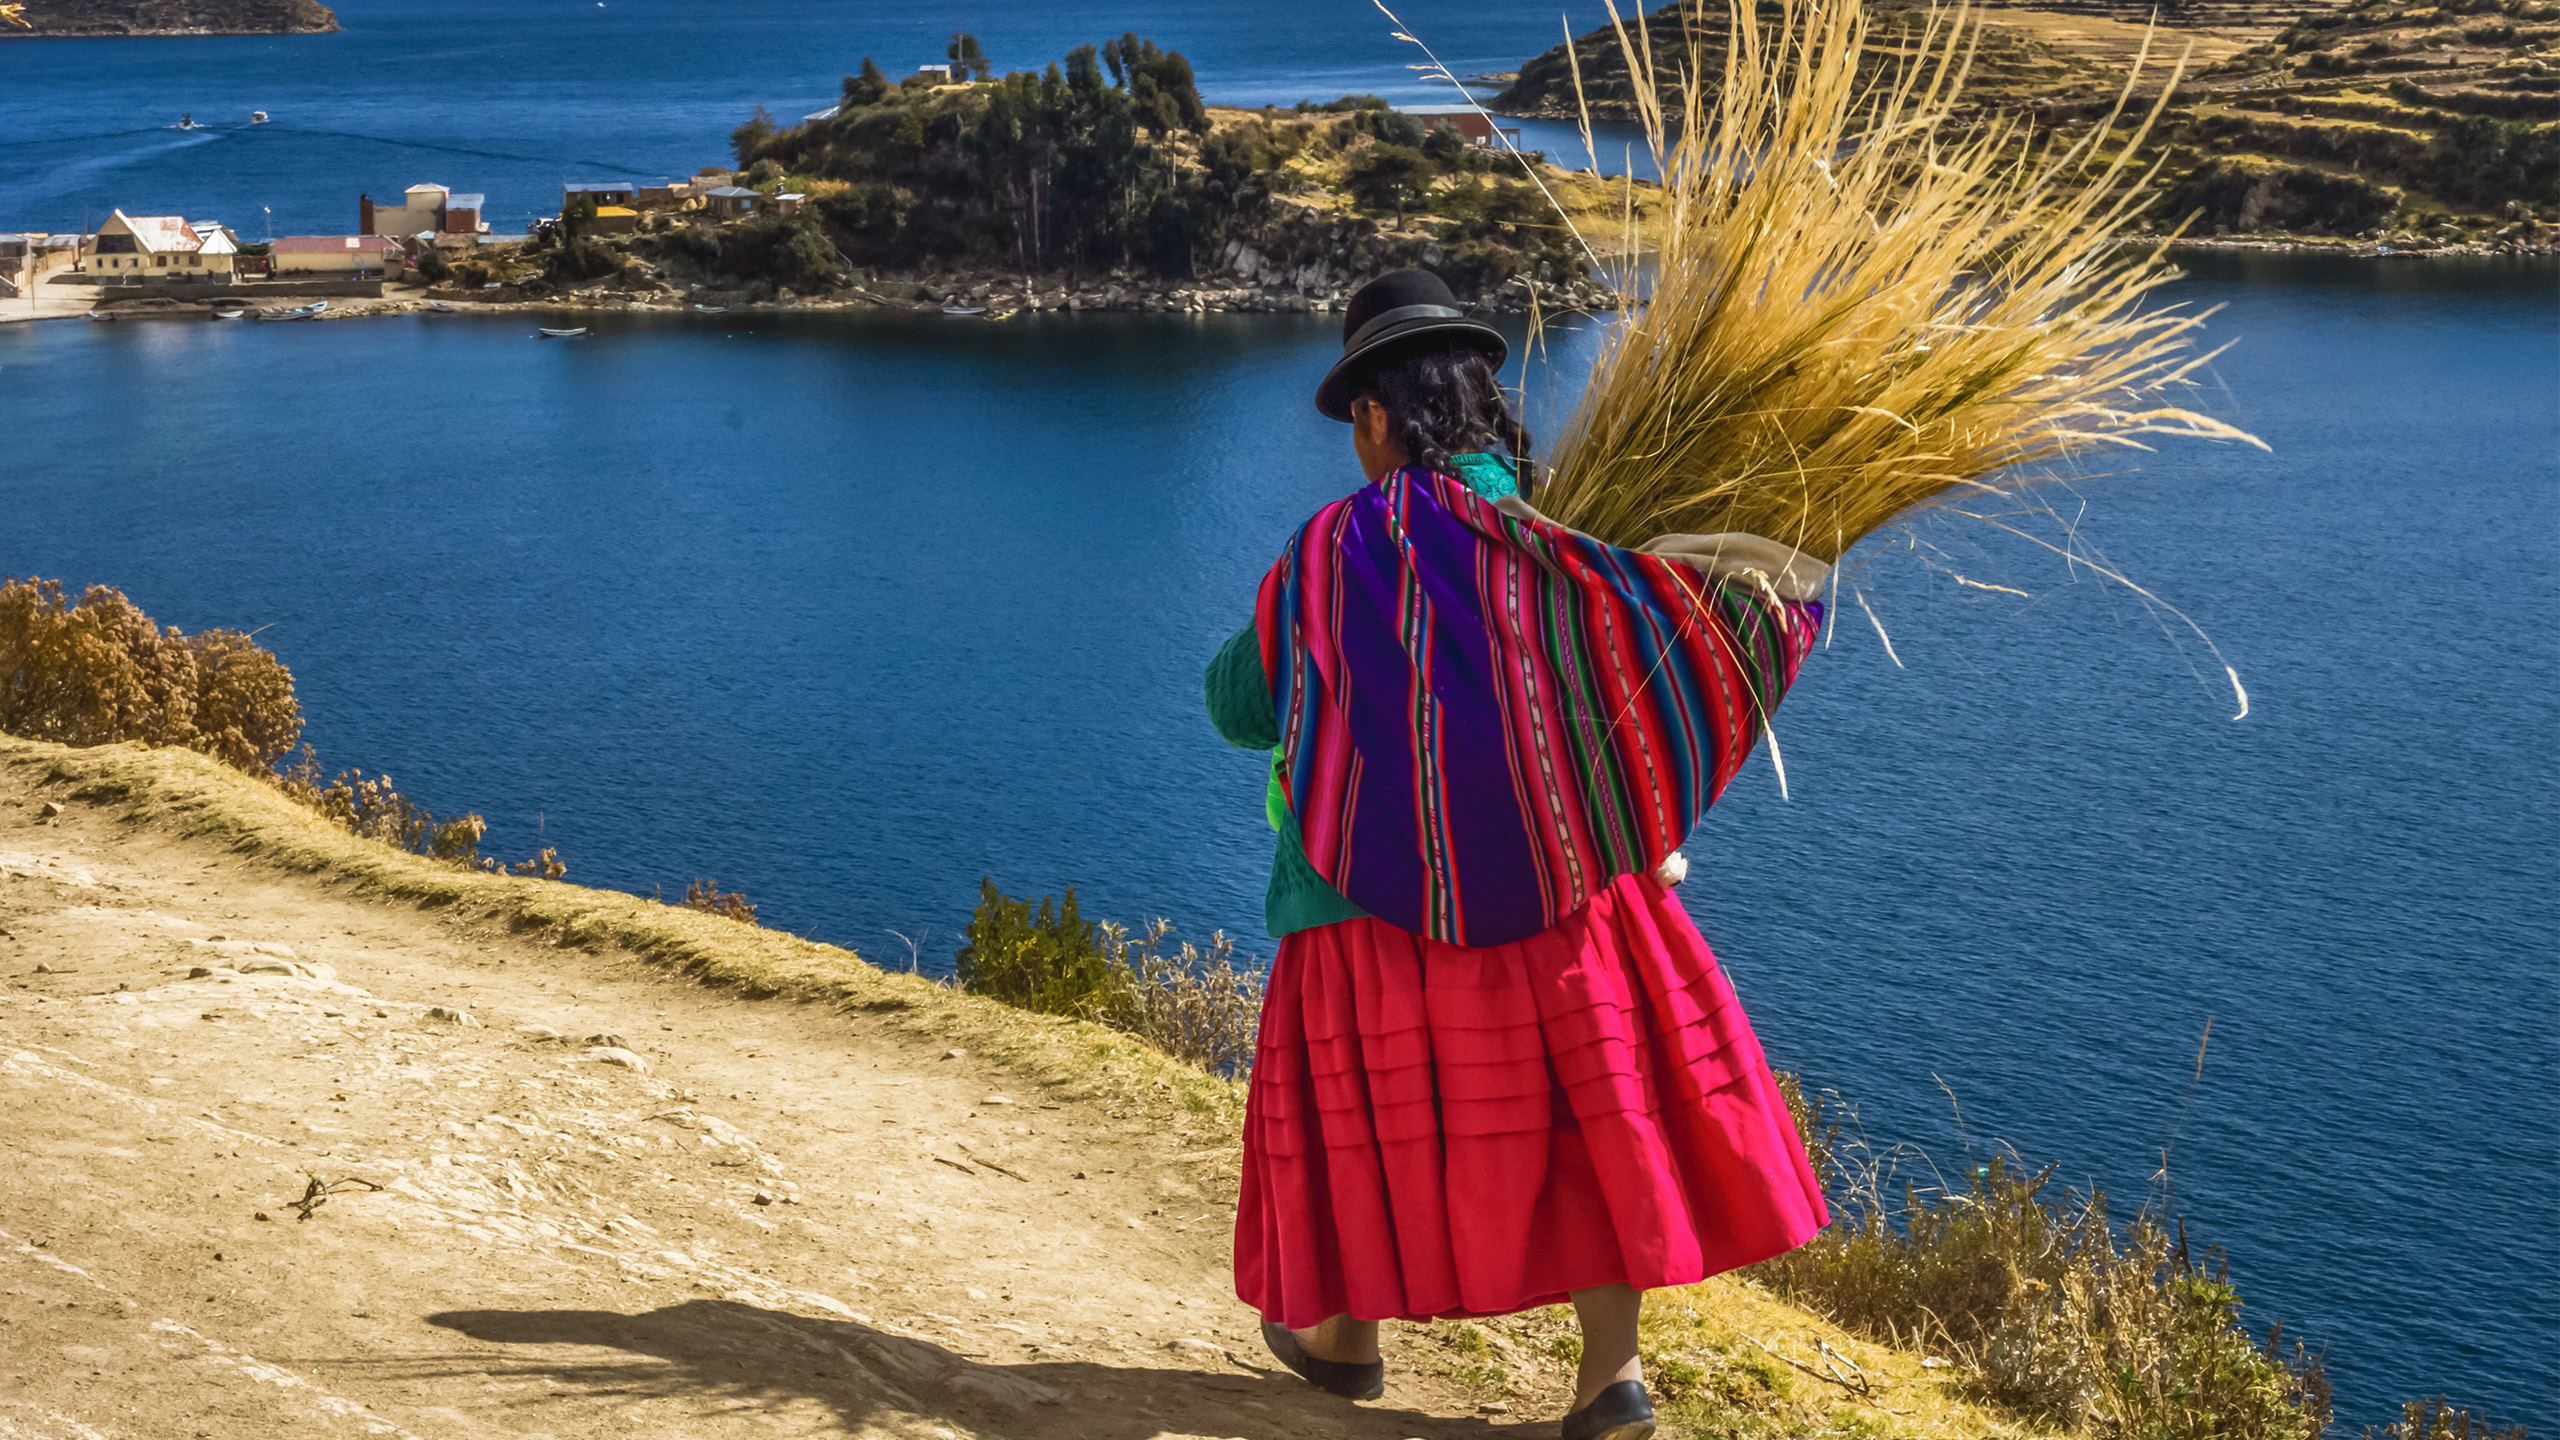 Bolivian Altiplano from the travel brochure: Indígena on the sunny island in Lake Titicaca with a clump of the famous totora reeds. | NiarKrad, Shutterstock